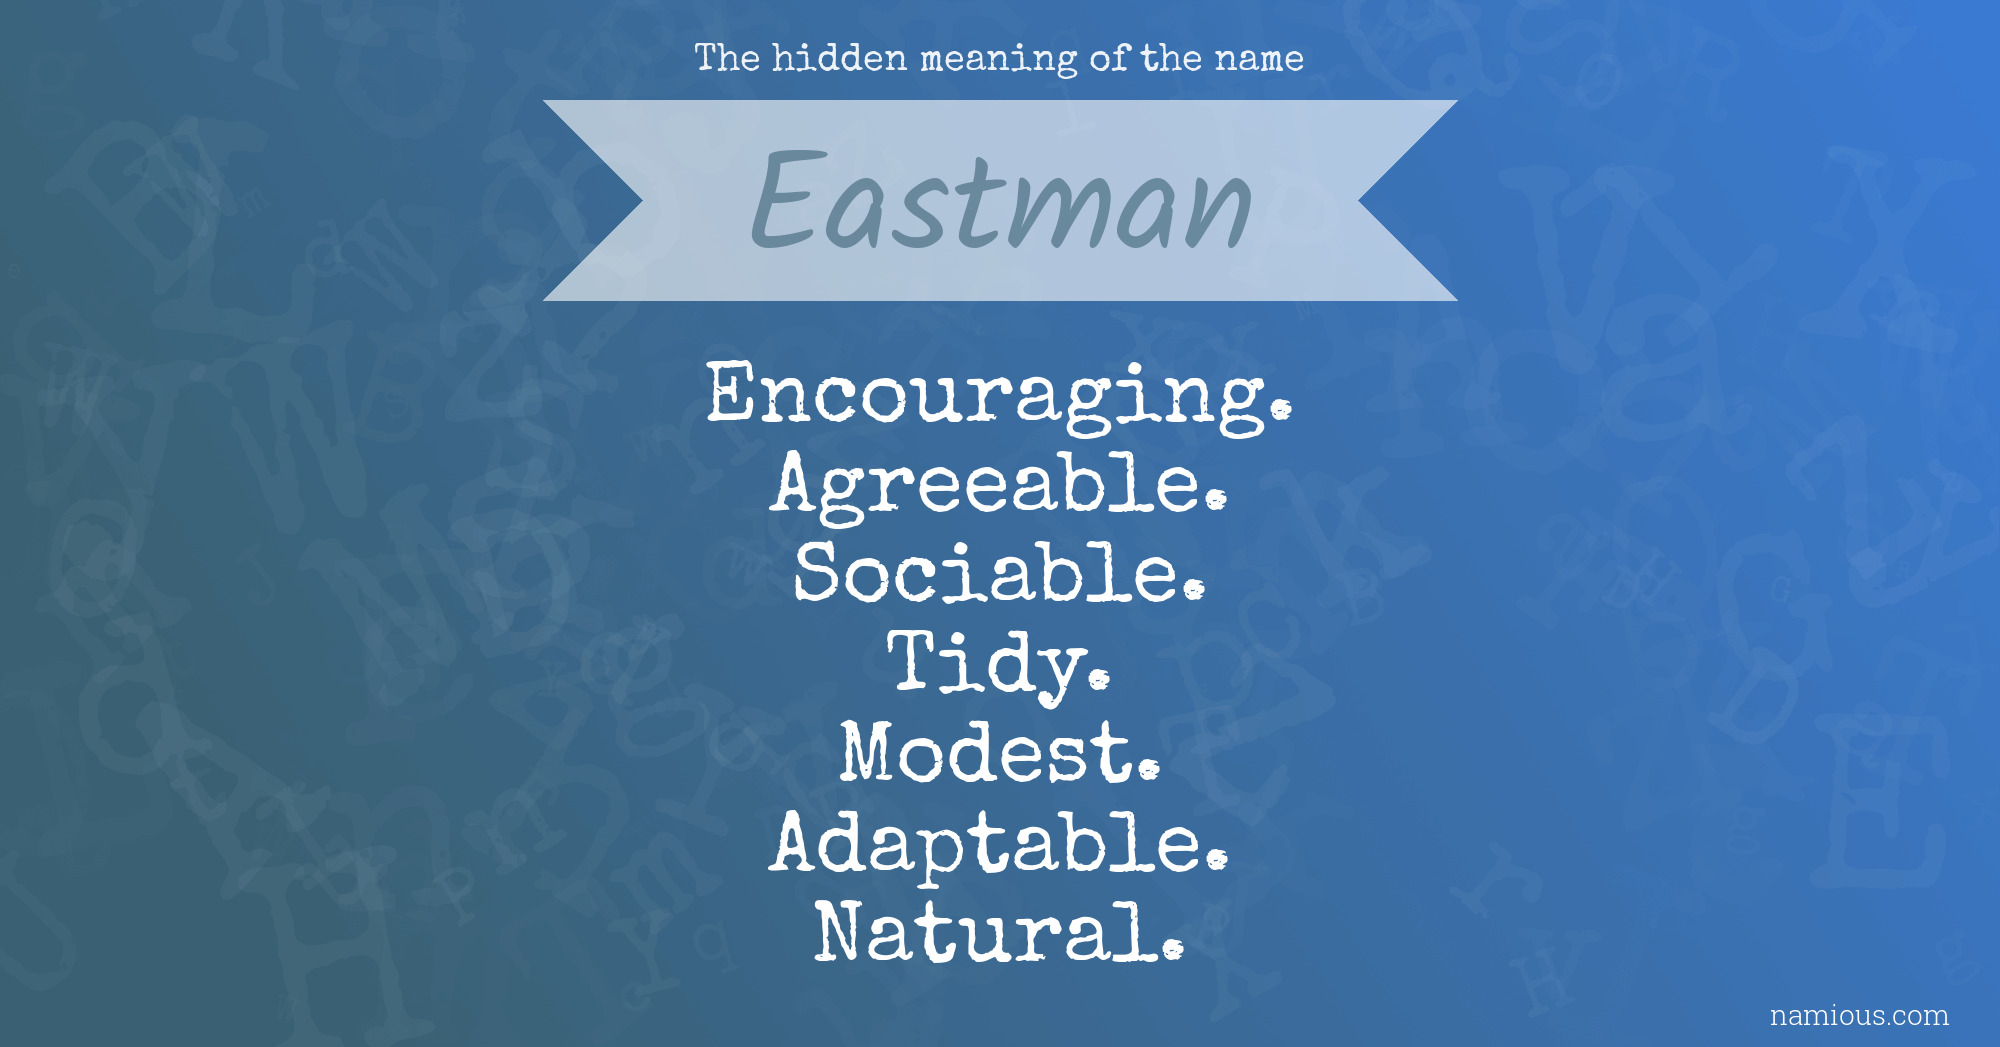 The hidden meaning of the name Eastman